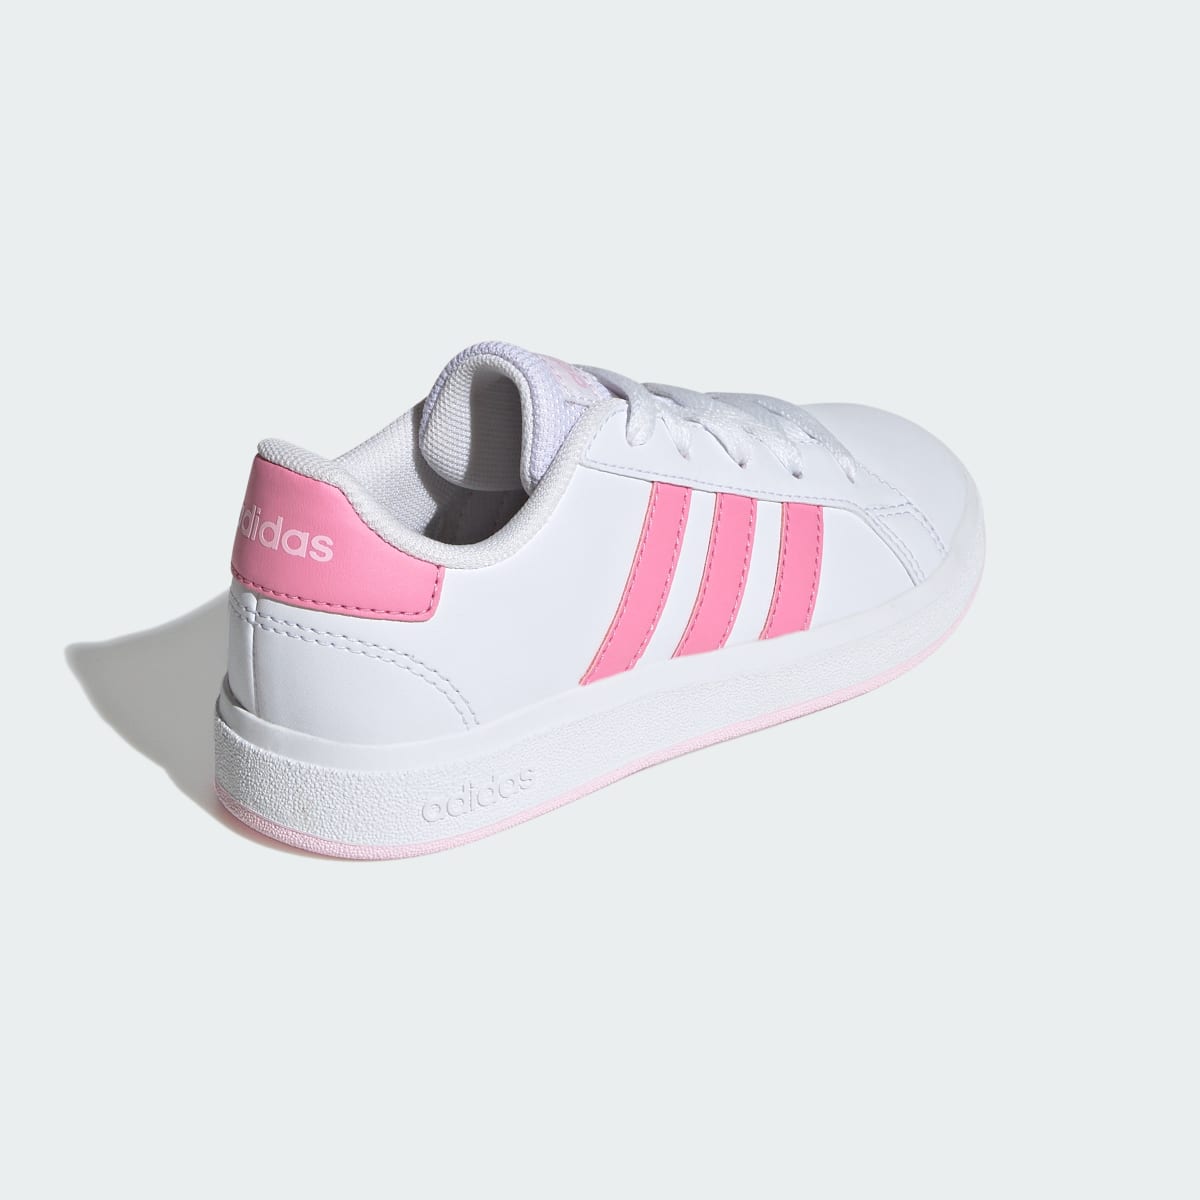 Adidas Grand Court Lifestyle Tennis Lace-Up Shoes. 6